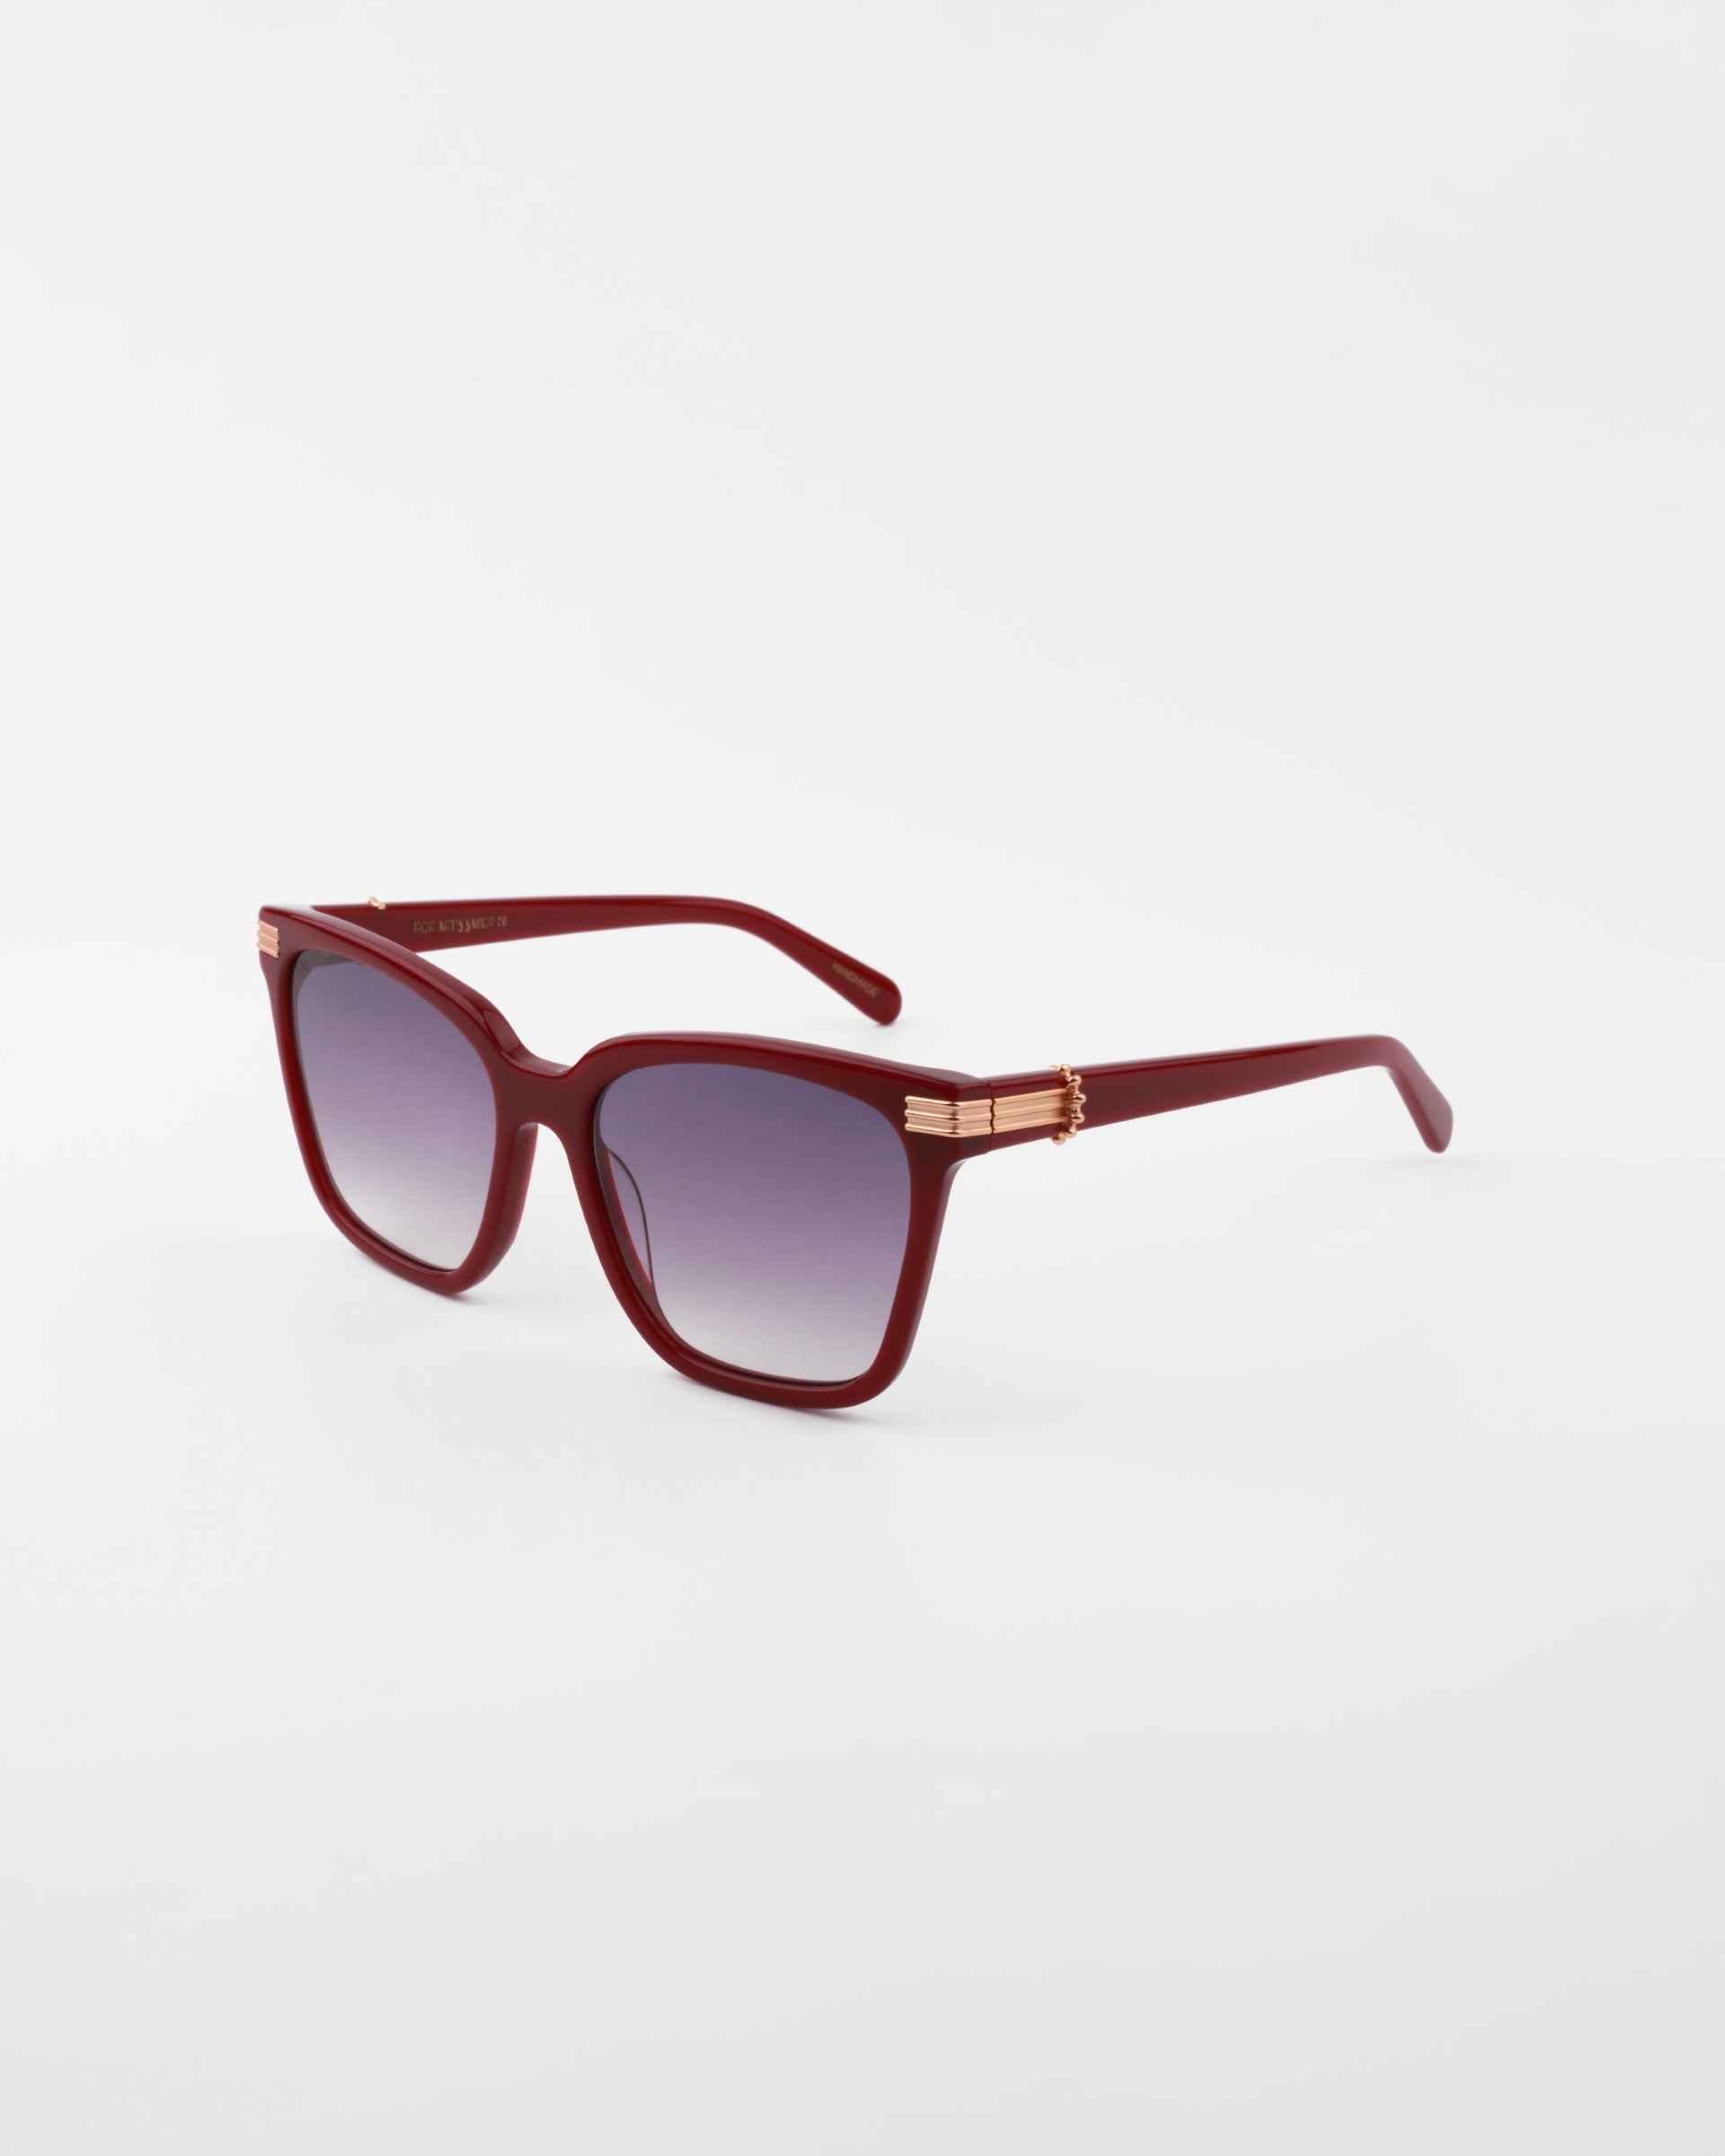 A pair of stylish, handmade acetate sunglasses featuring dark maroon frames and gradient purple, UV-protected lenses. The temples boast an 18-karat gold-plated decorative accent near the hinges. The Gaia sunglasses by For Art&#39;s Sake® are positioned on a white background.